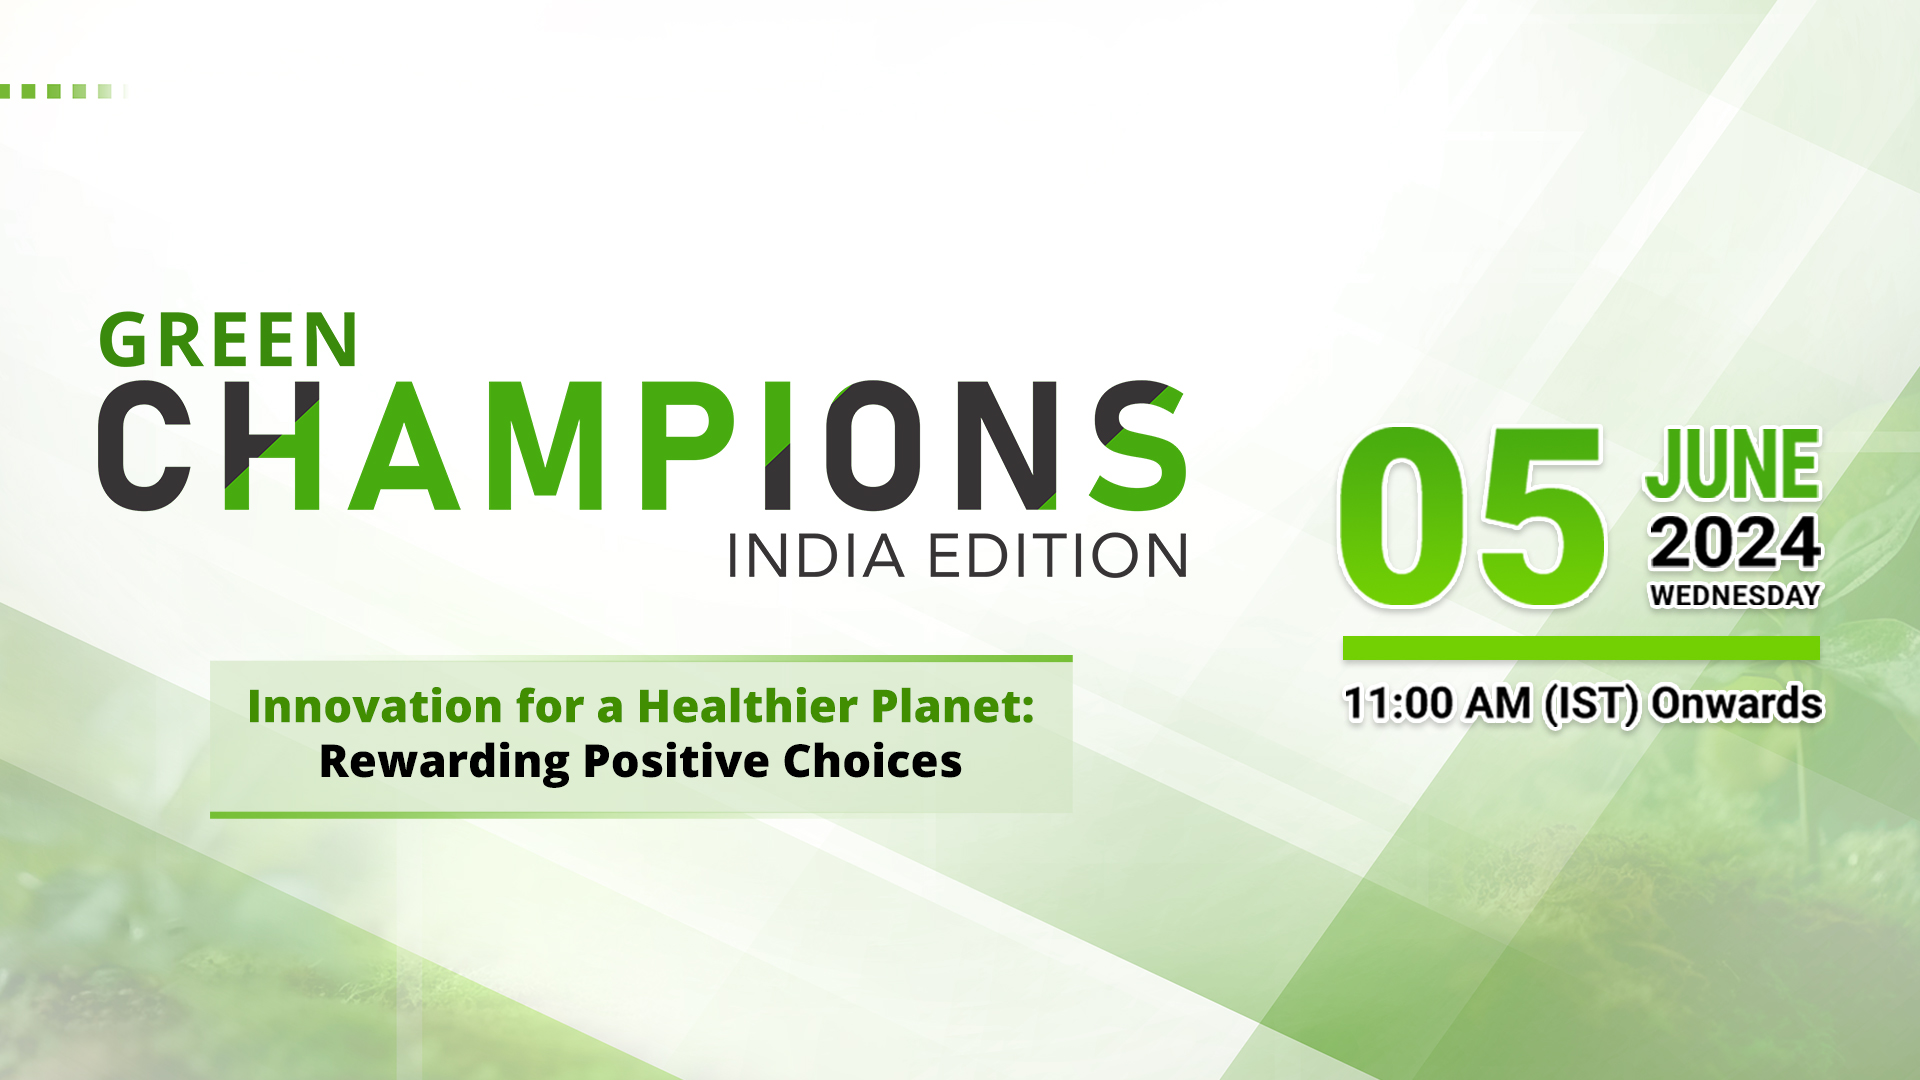 GECI Events unveils India edition of Green Champions